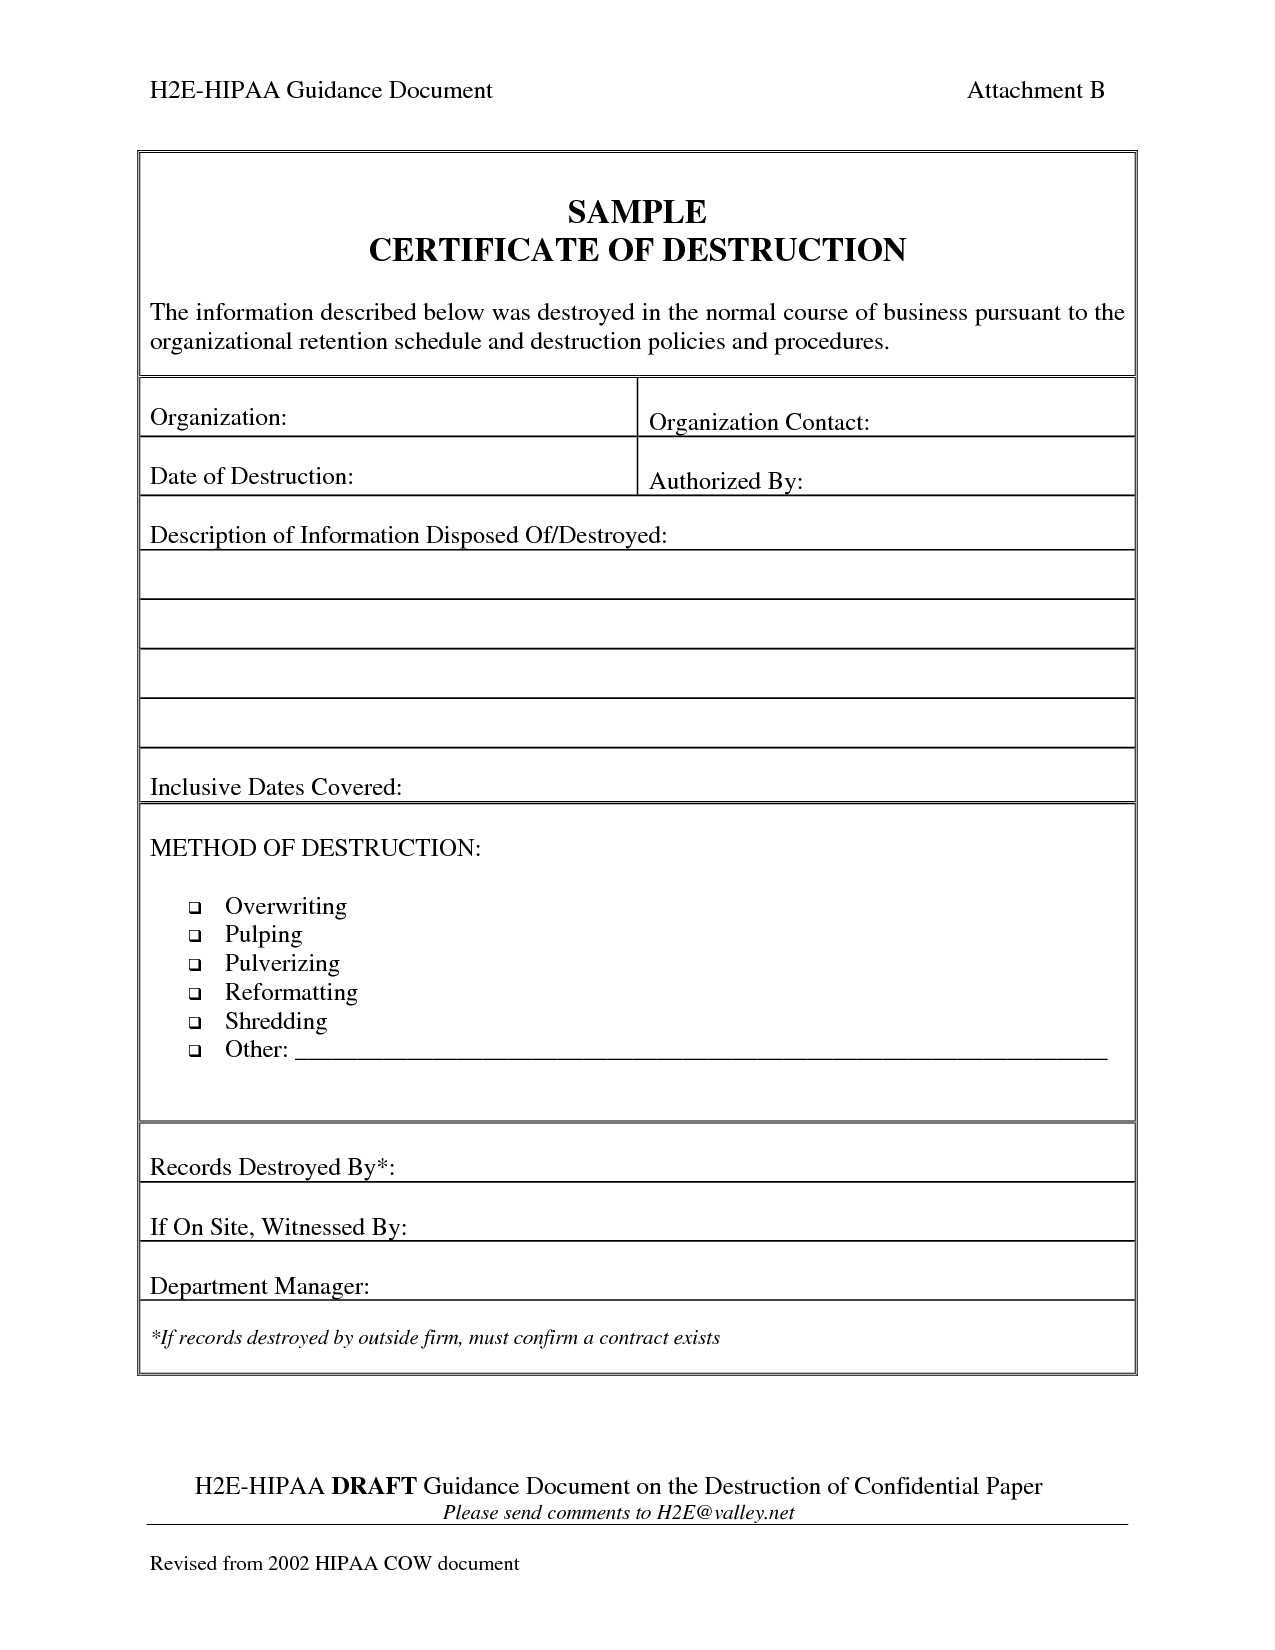 Certificate Template Archives - Atlantaauctionco Pertaining To Certificate Of Disposal Template